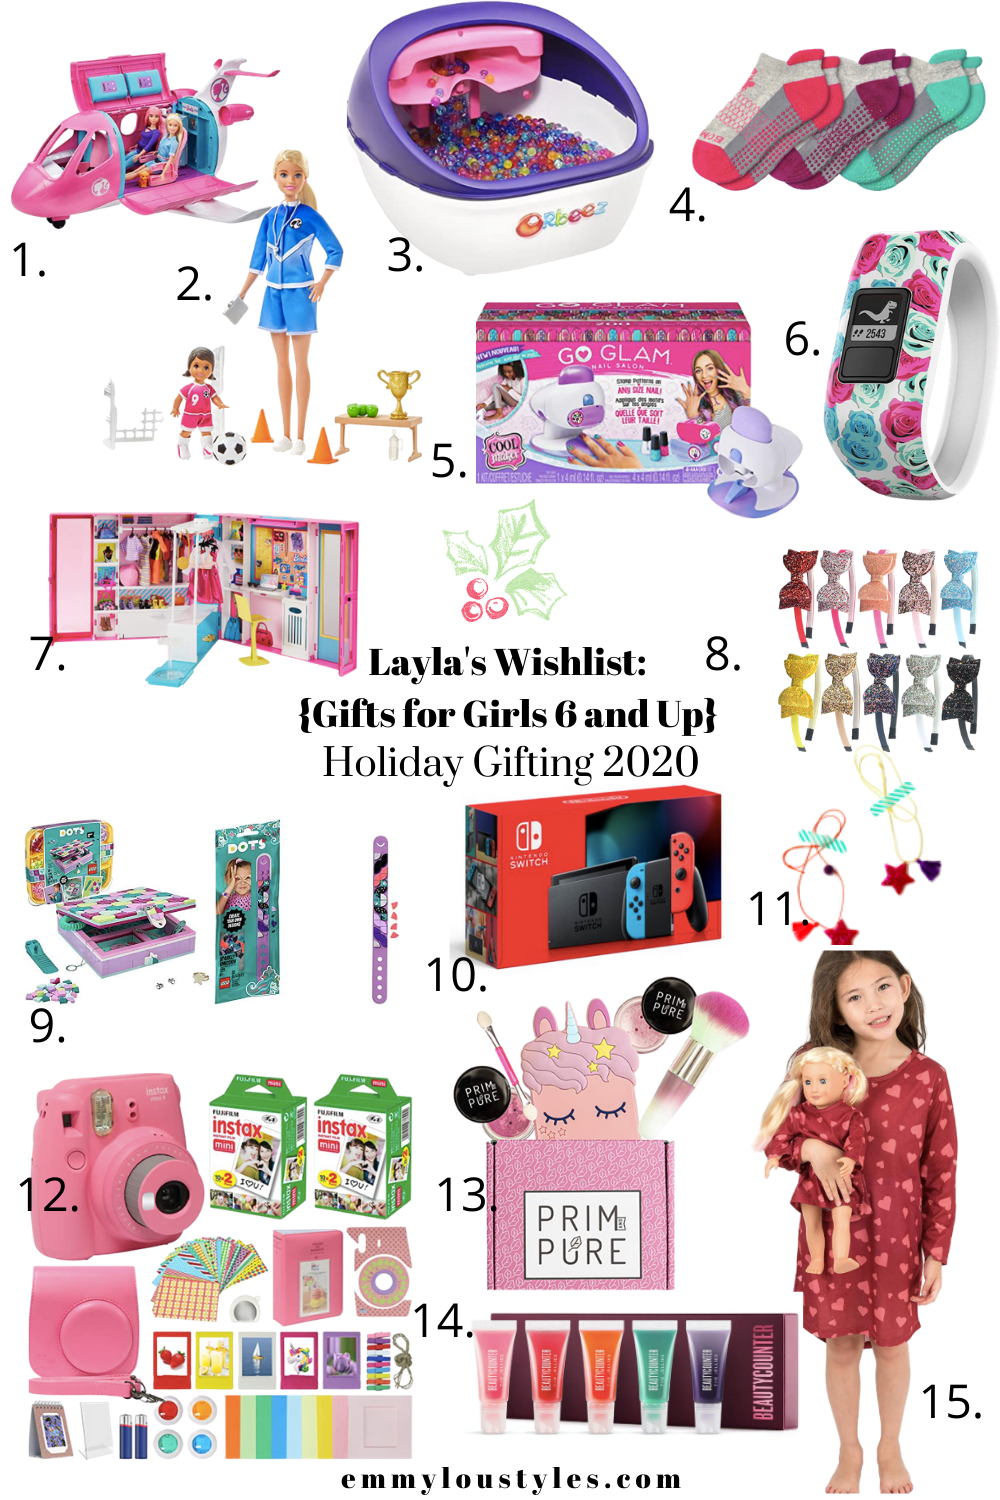 gift ideas for girls ages 6 and up